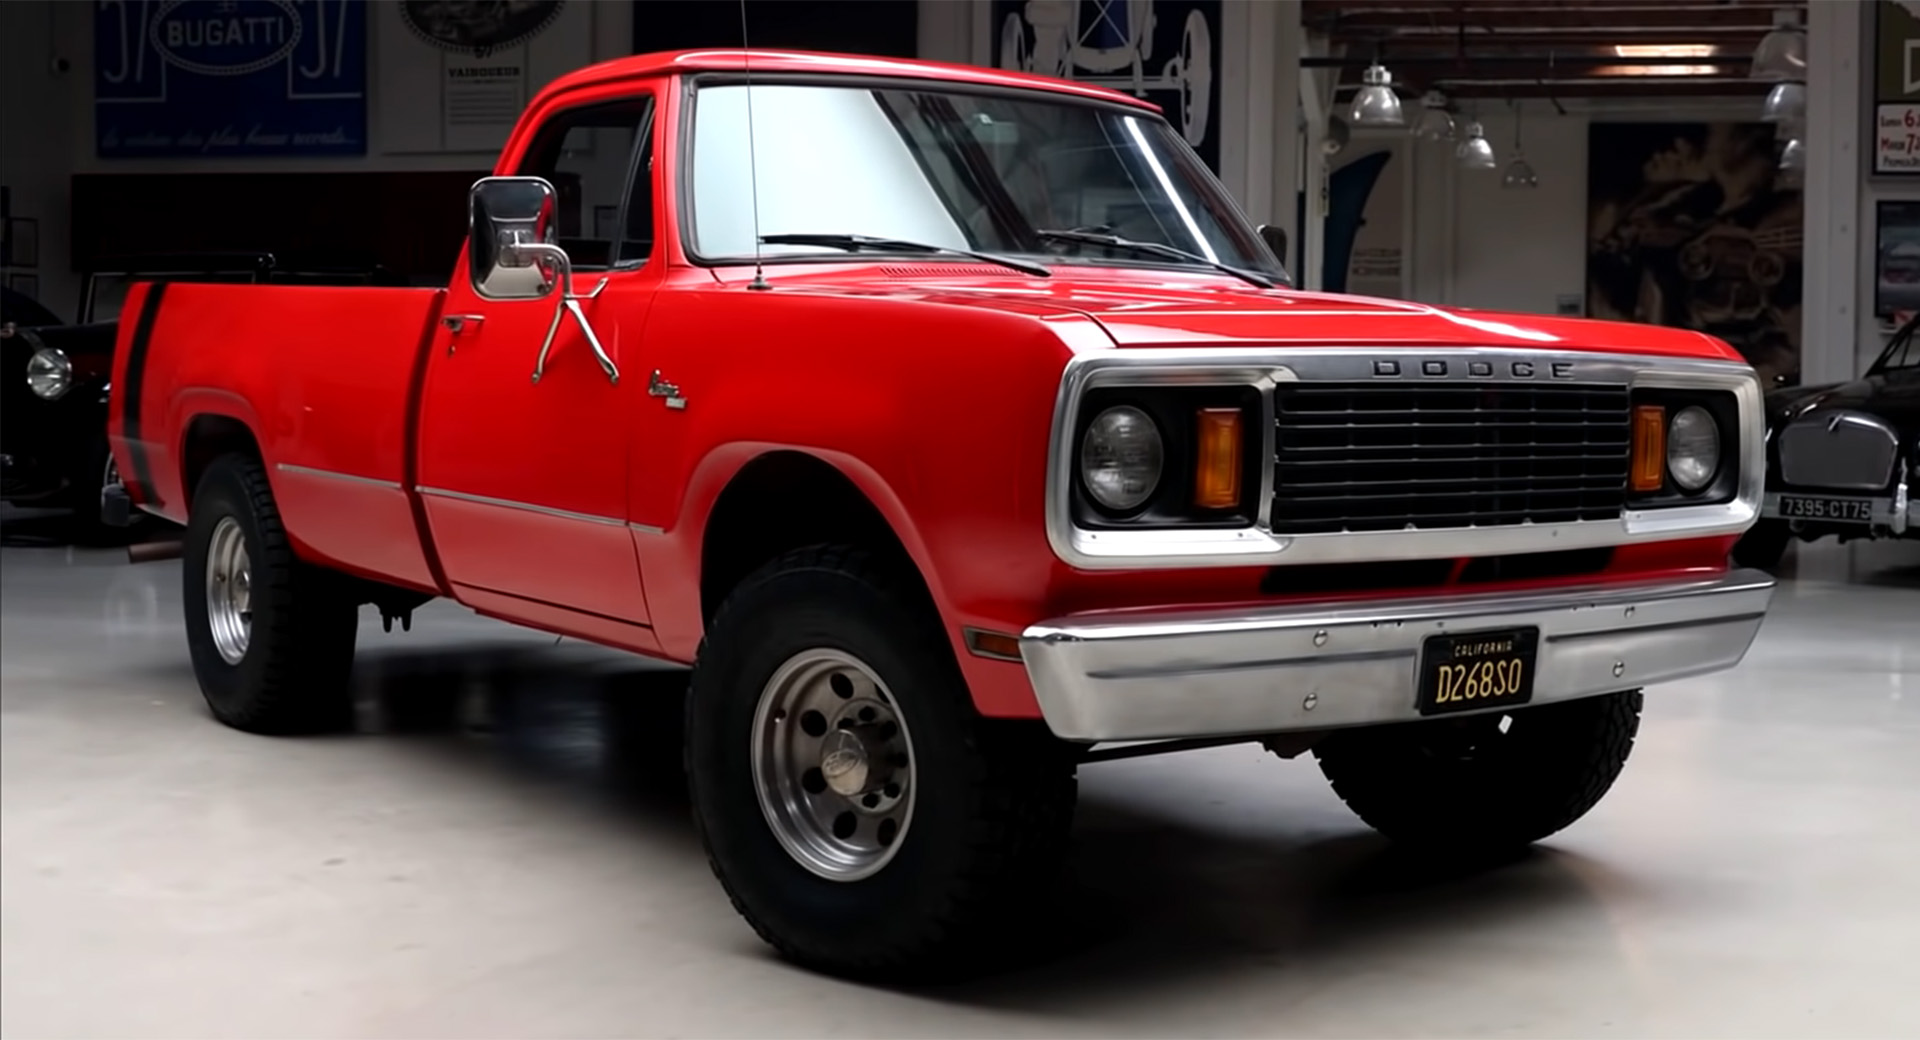 Detailing Brings Cars Back To Showroom Condition On Jay Leno's Garage